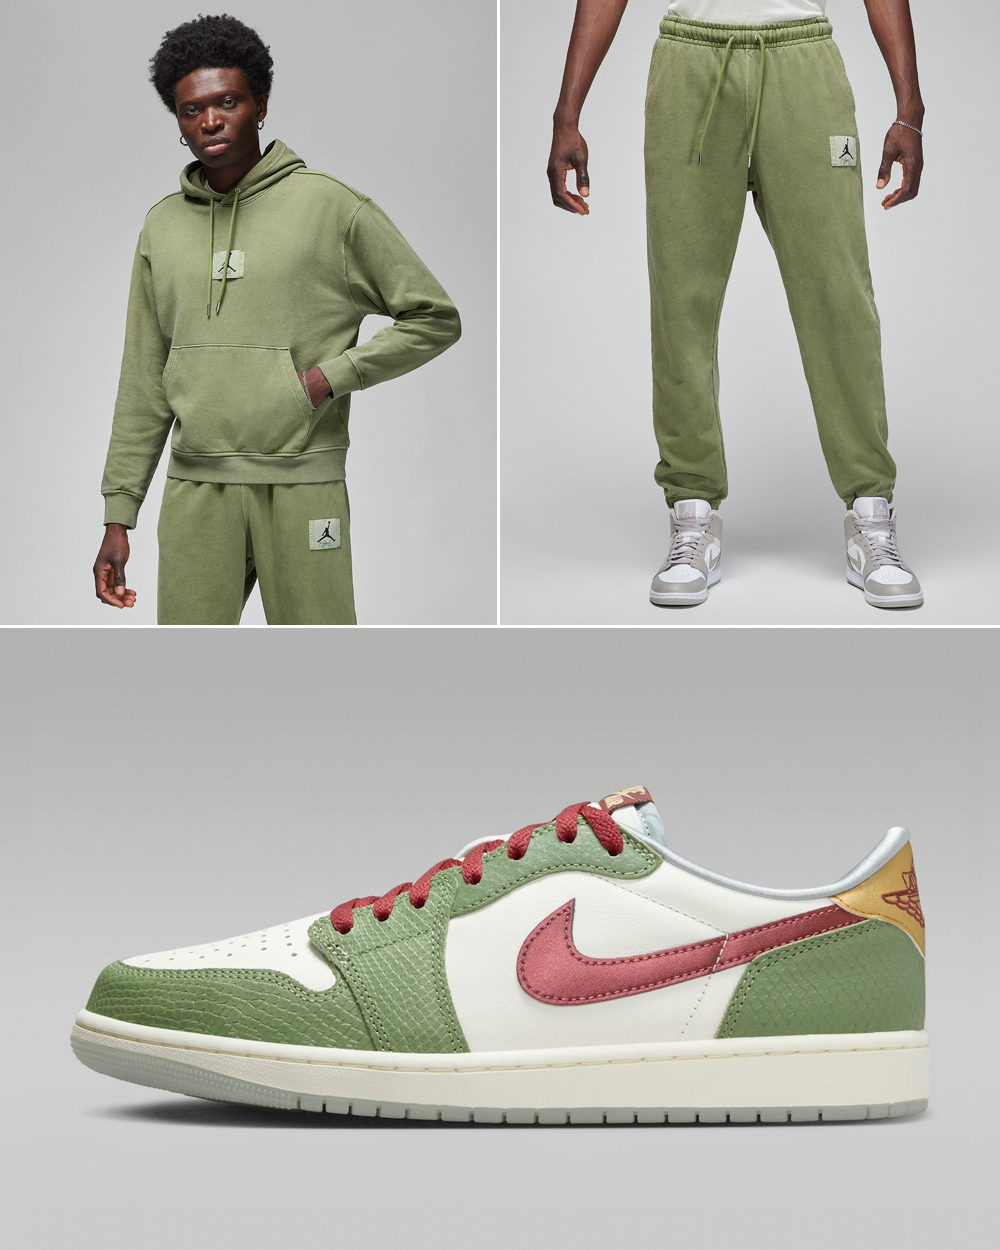 Air-Jordan-1-Low-OG-Year-of-the-Dragon-Chinese-New-Year-Hoodie-Pants-Outfit